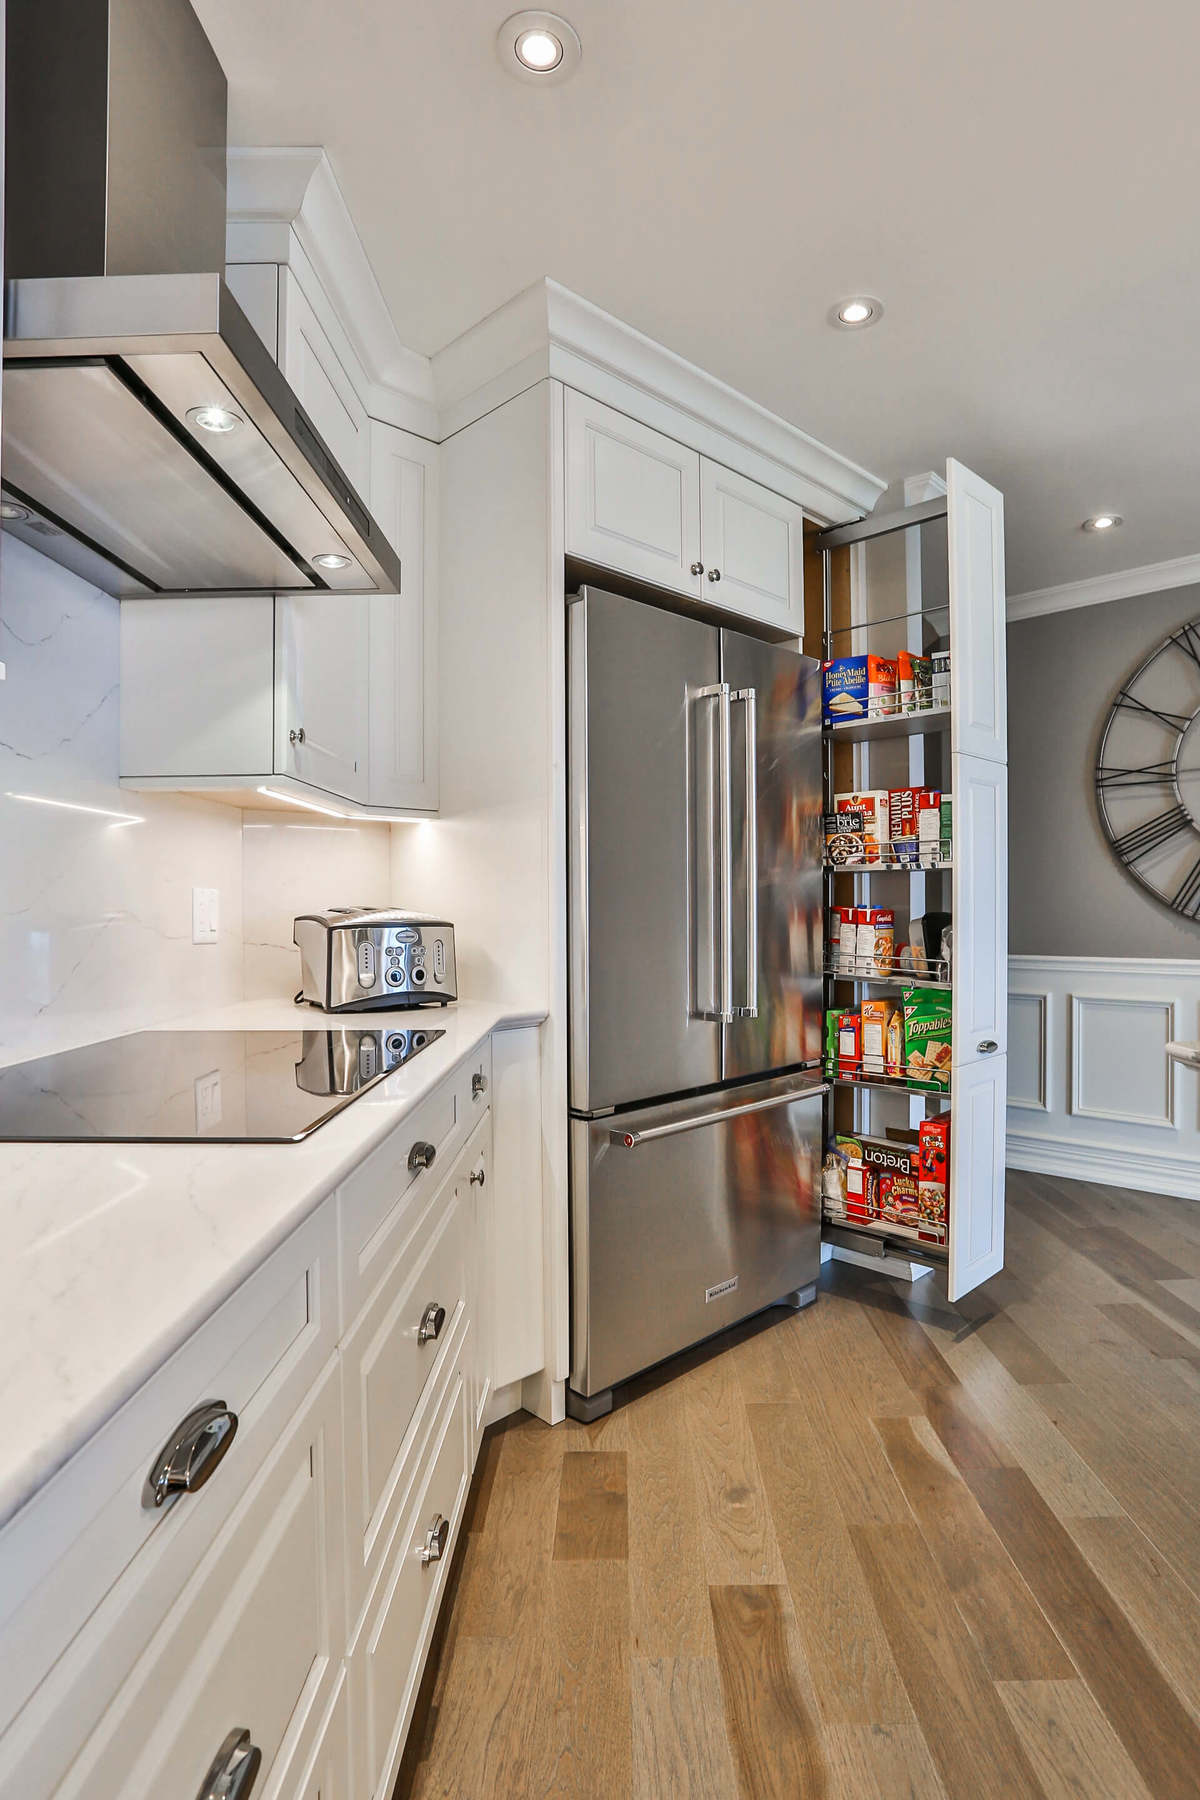 White kitchen design with white cupboards, stainless steel appliances, hardwood floors, and a generous storage.